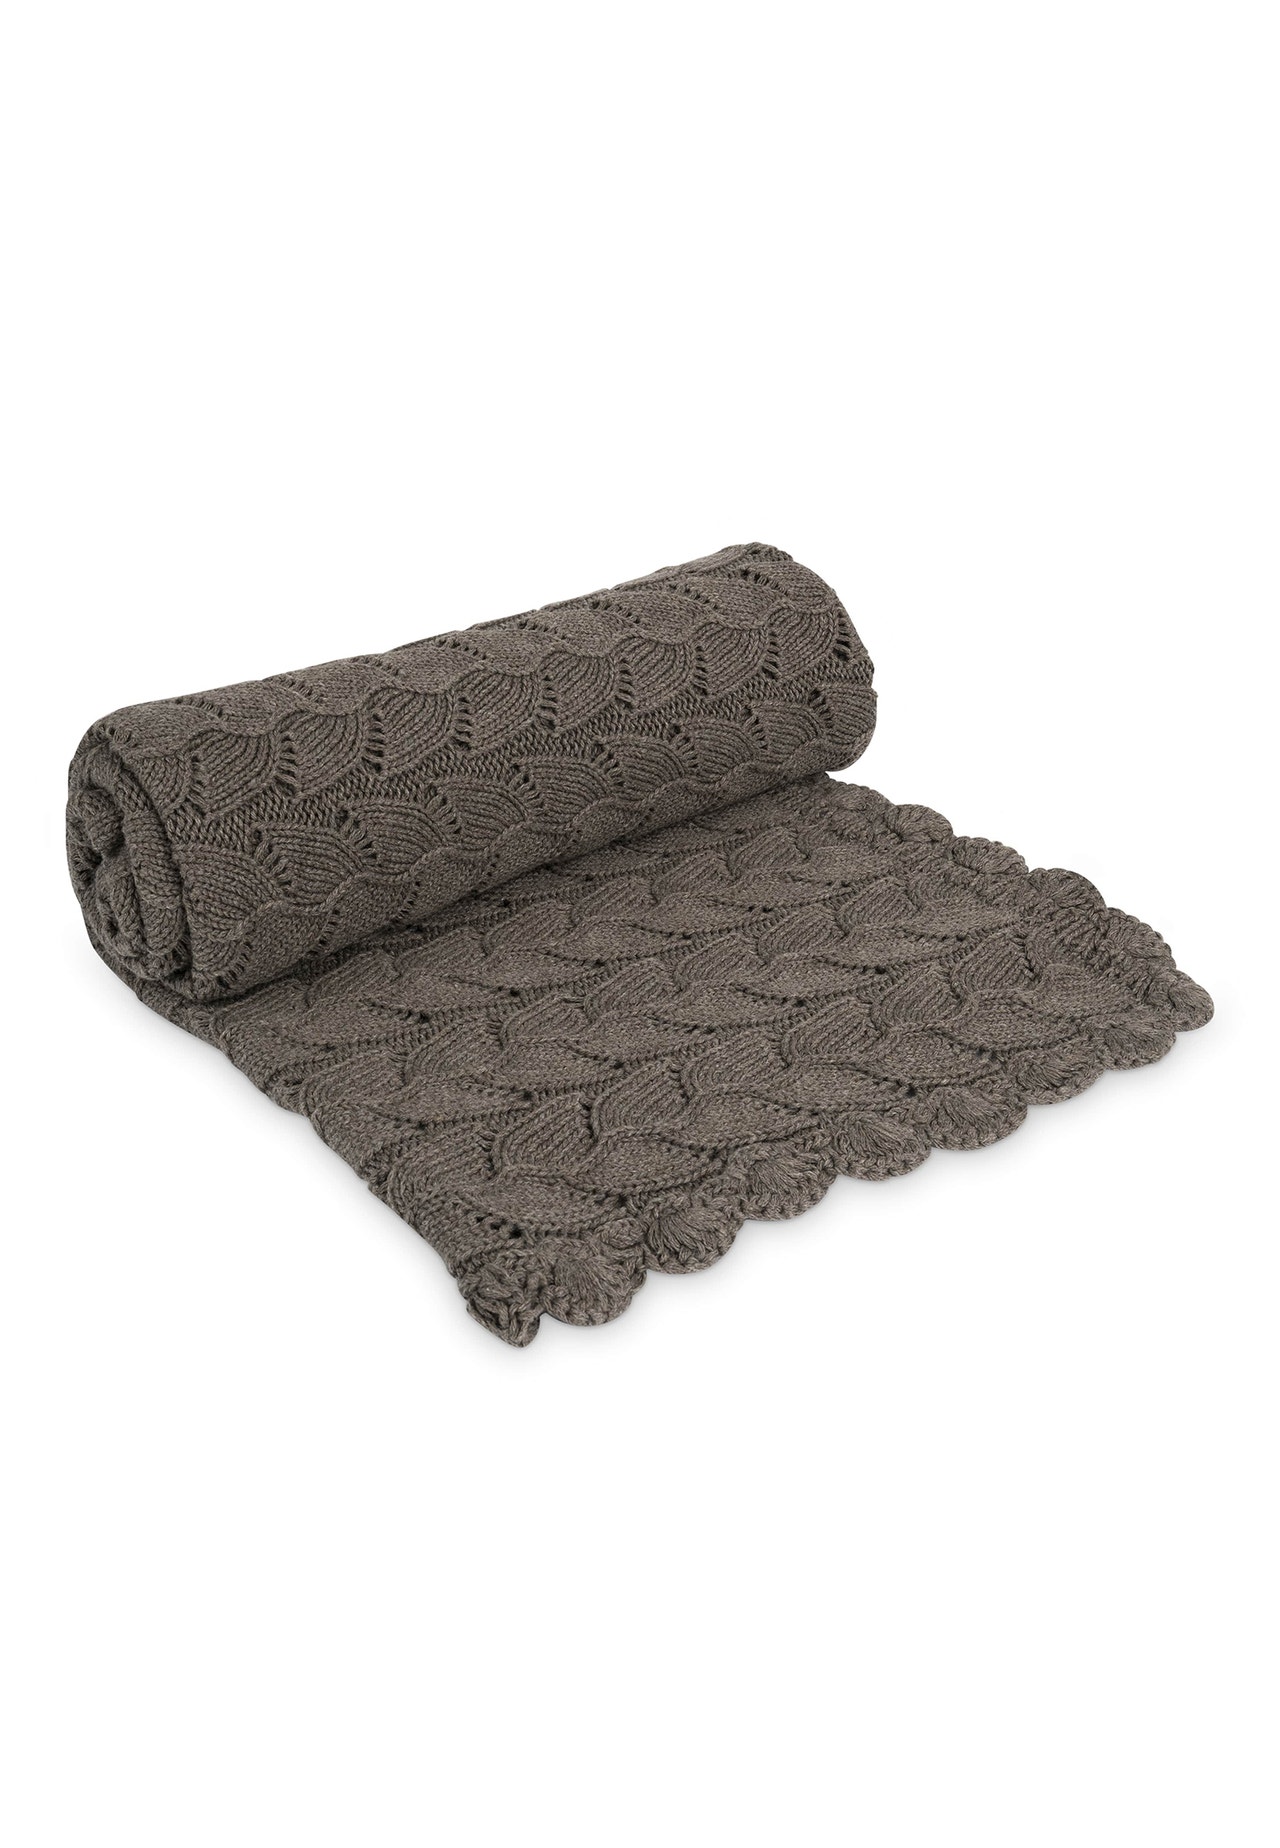 MAMA.LICIOUS that's mine Chiffonette Knitted pointelle Blanket -Earth Brown Melange - 88888878